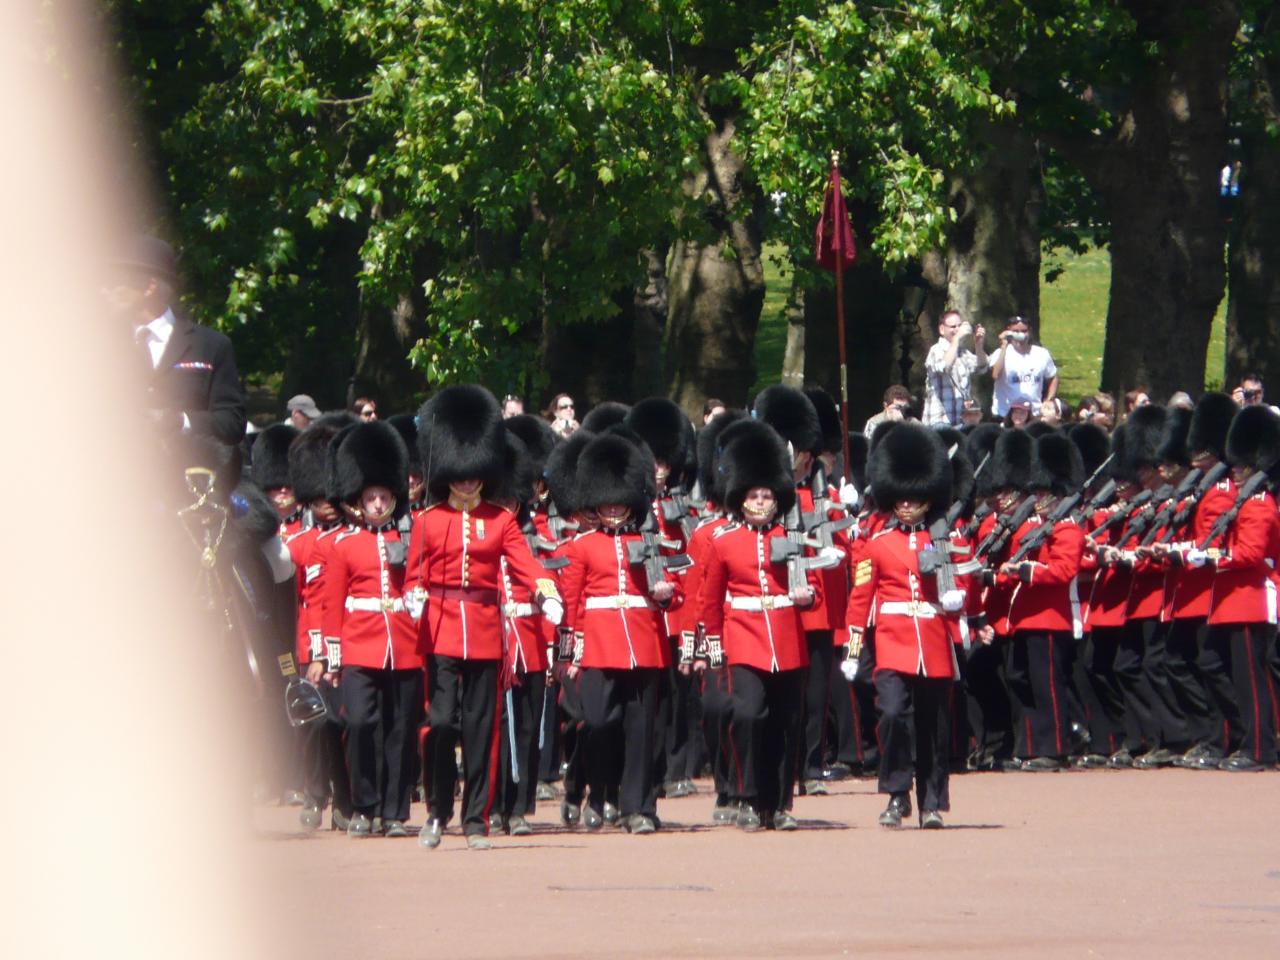 a band marching in a military ceremony with red uniforms